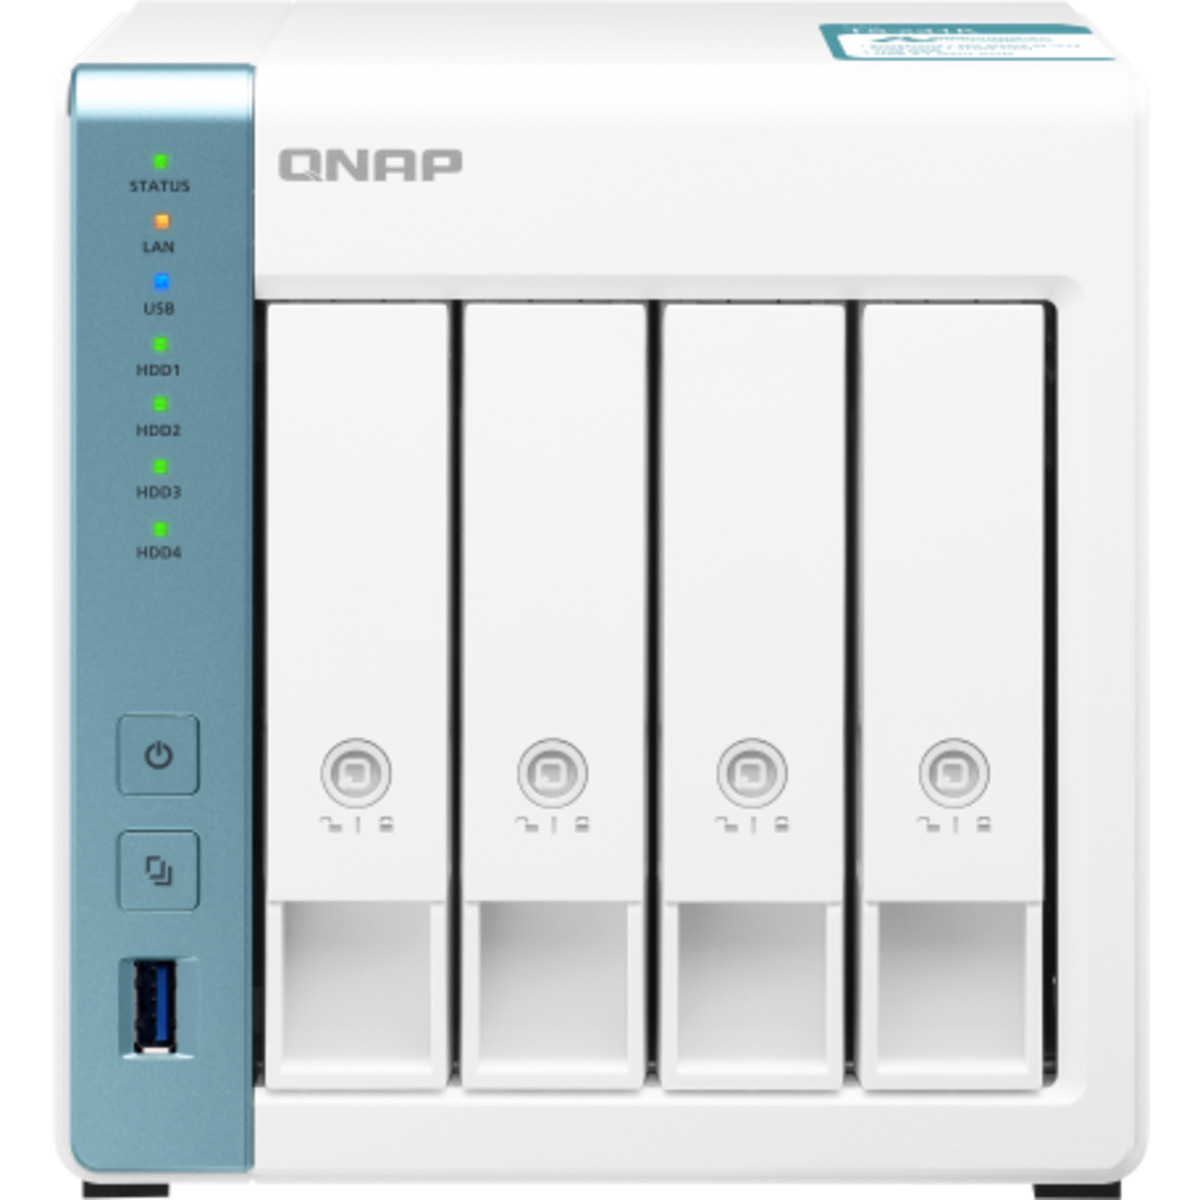 QNAP TS-431K 80tb 4-Bay Desktop Personal / Basic Home / Small Office NAS - Network Attached Storage Device 4x20tb Toshiba Enterprise Capacity MG10ACA20TE 3.5 7200rpm SATA 6Gb/s HDD ENTERPRISE Class Drives Installed - Burn-In Tested TS-431K